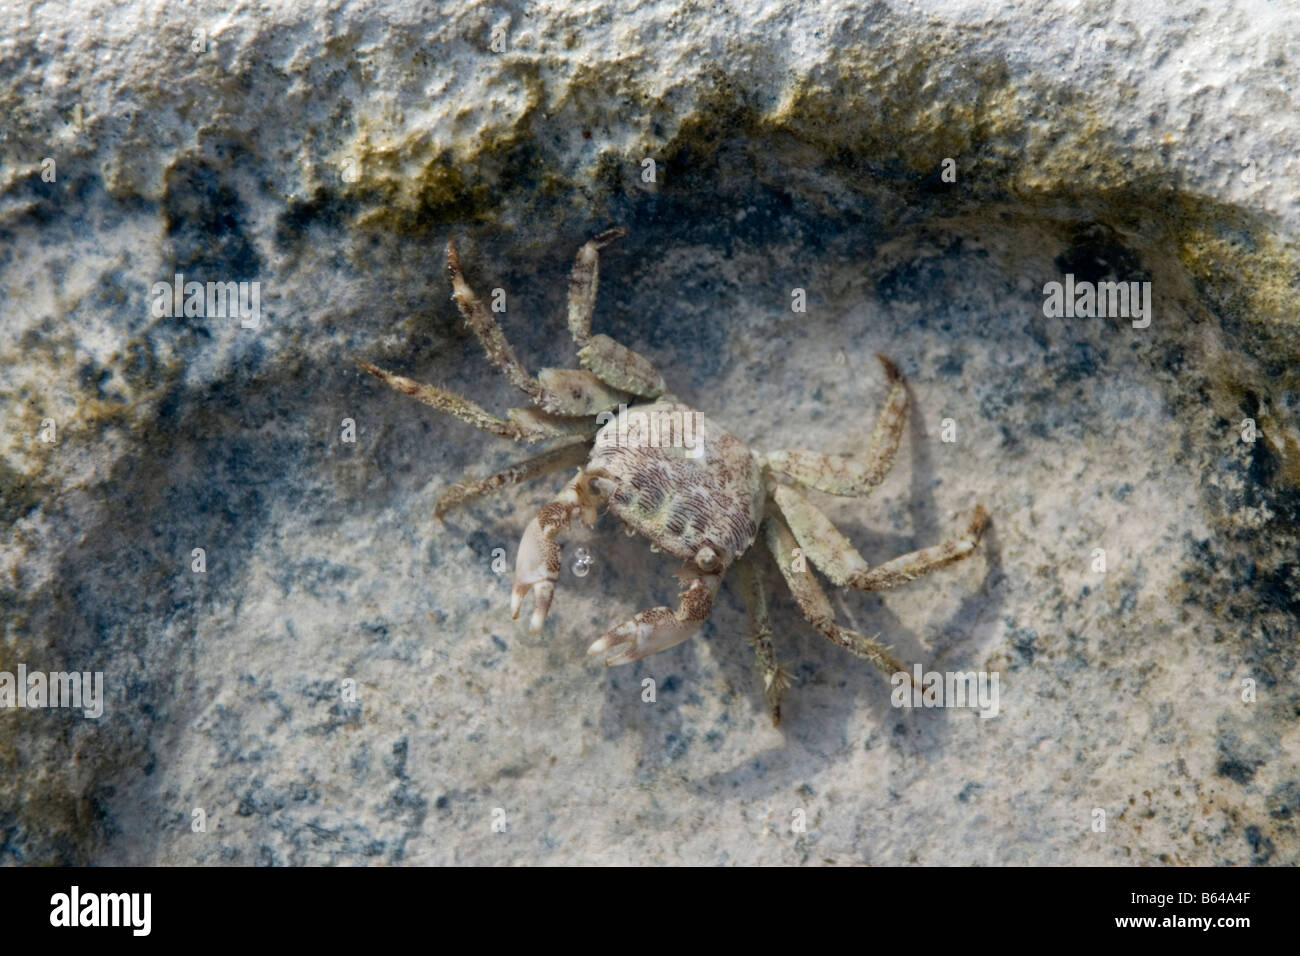 A Maltese shore crab in a pool of seawater in an indent on a limestone shore these crabs are common around Malta s shoreline Stock Photo